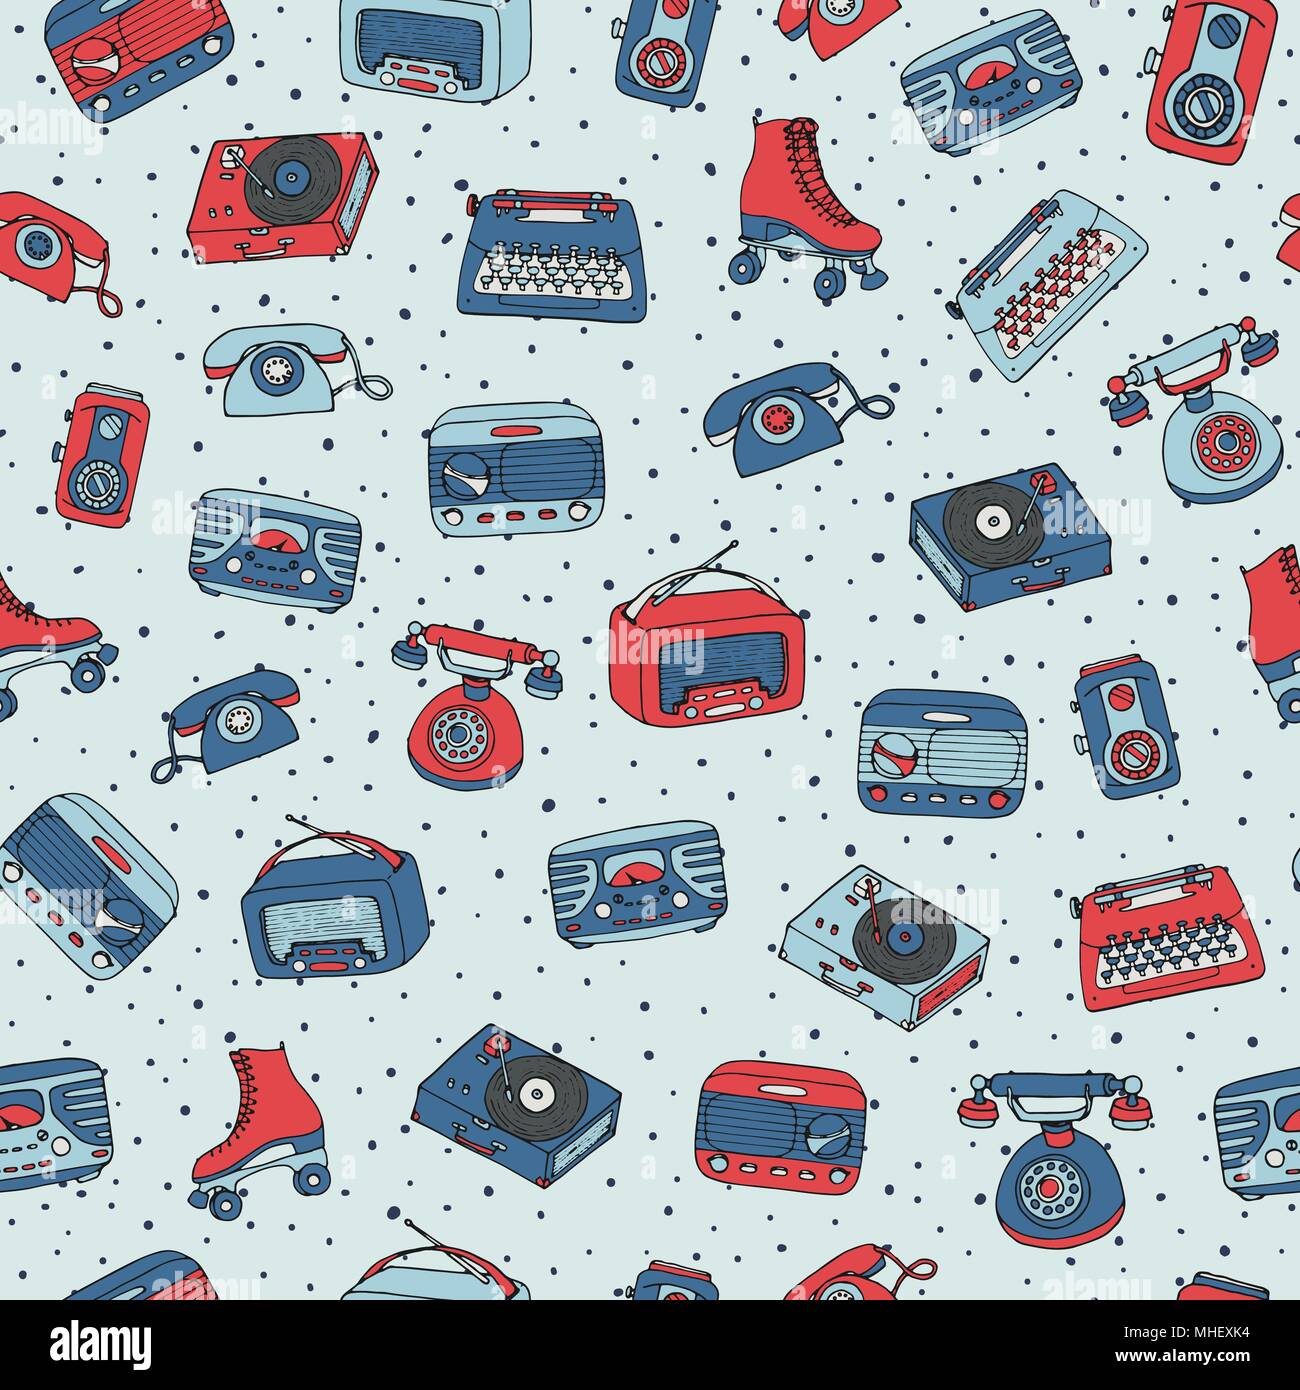 Vector retro seamless pattern with antique tech, radio, typewriter, roller skates and vinyl record player  on the dotted background. Hand drawn vintag Stock Vector